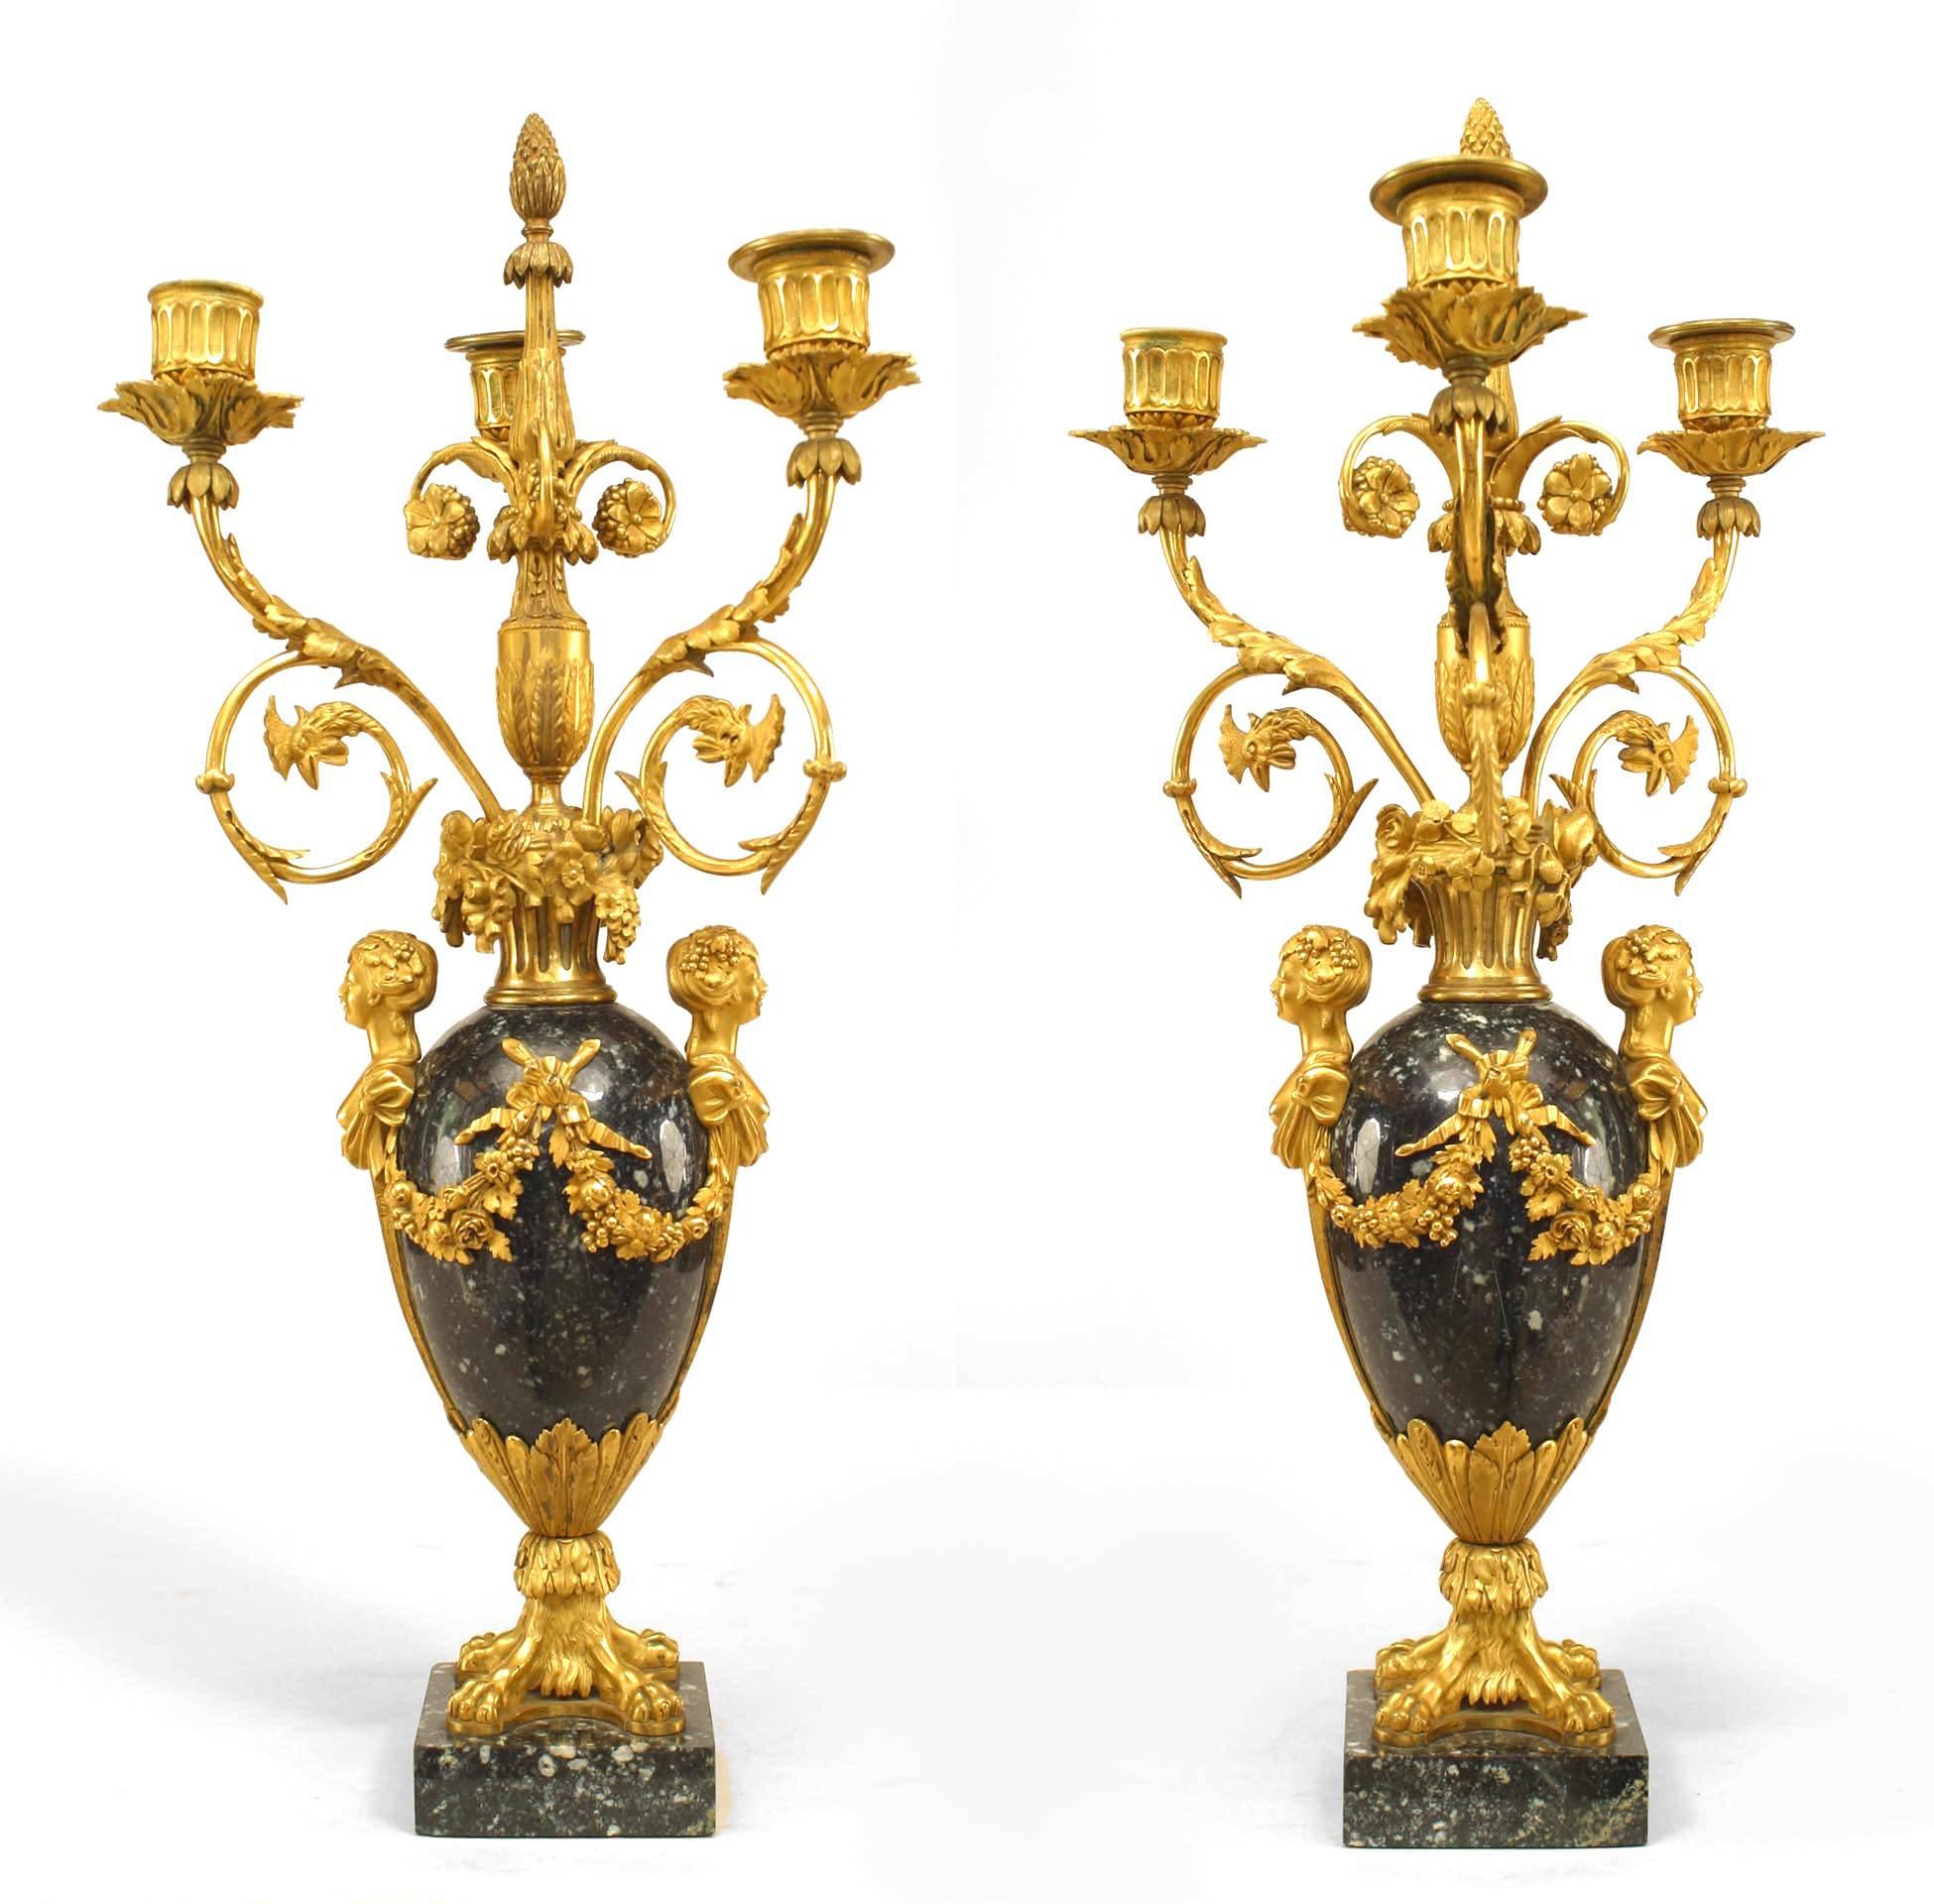 Pair of French Victorian (19th Century) black marble and gilt bronze trim 3-light candelabras with extensive floral and swag design & lion paw details (signed: HENRY DASSON 1879) (PRICED AS Pair)
